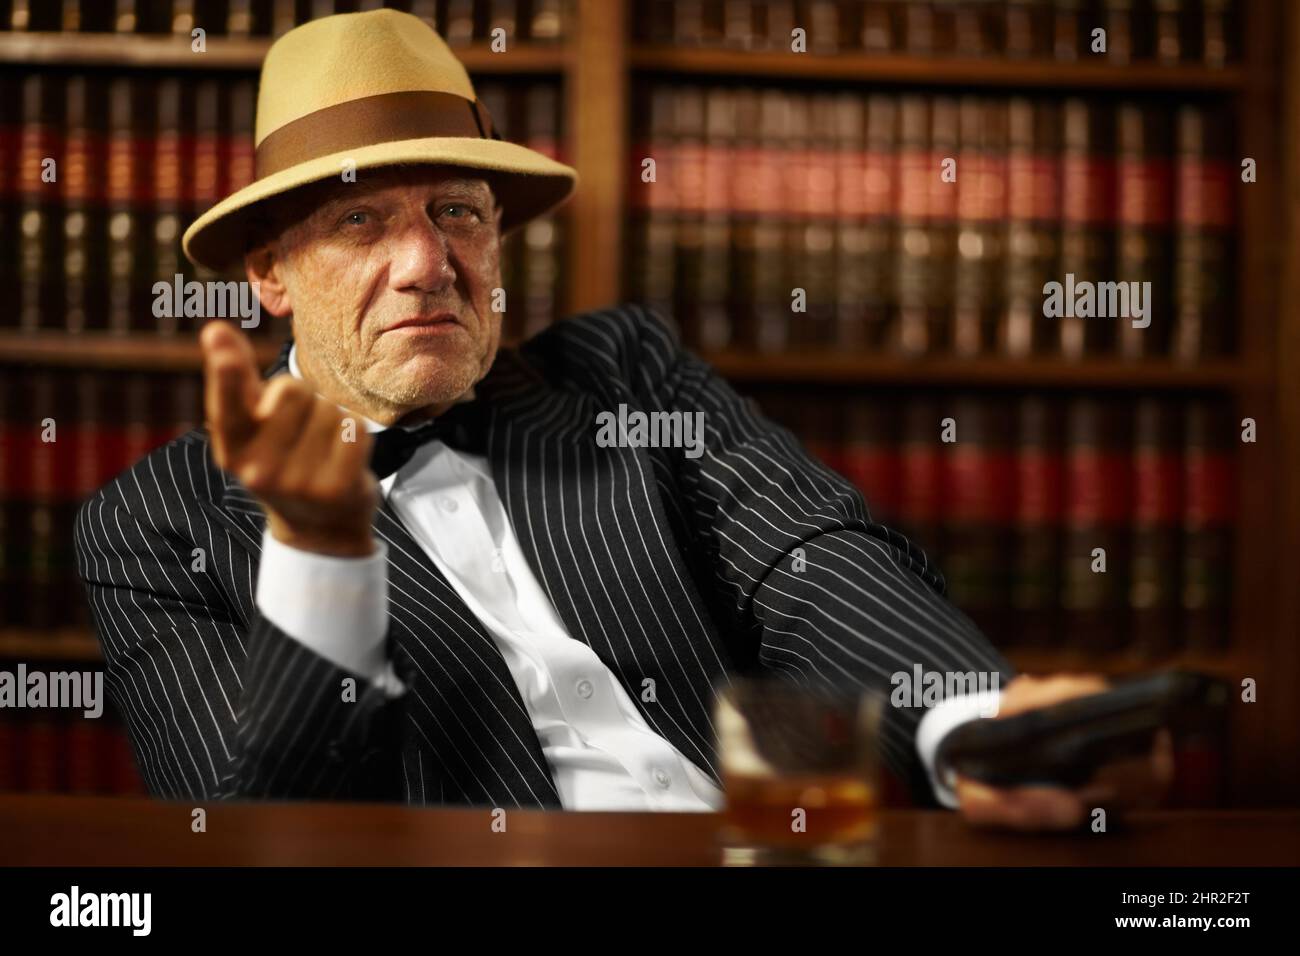 He heads up a large criminal organisation. Aged mob boss wearing a hat and looking serious while pointing. Stock Photo